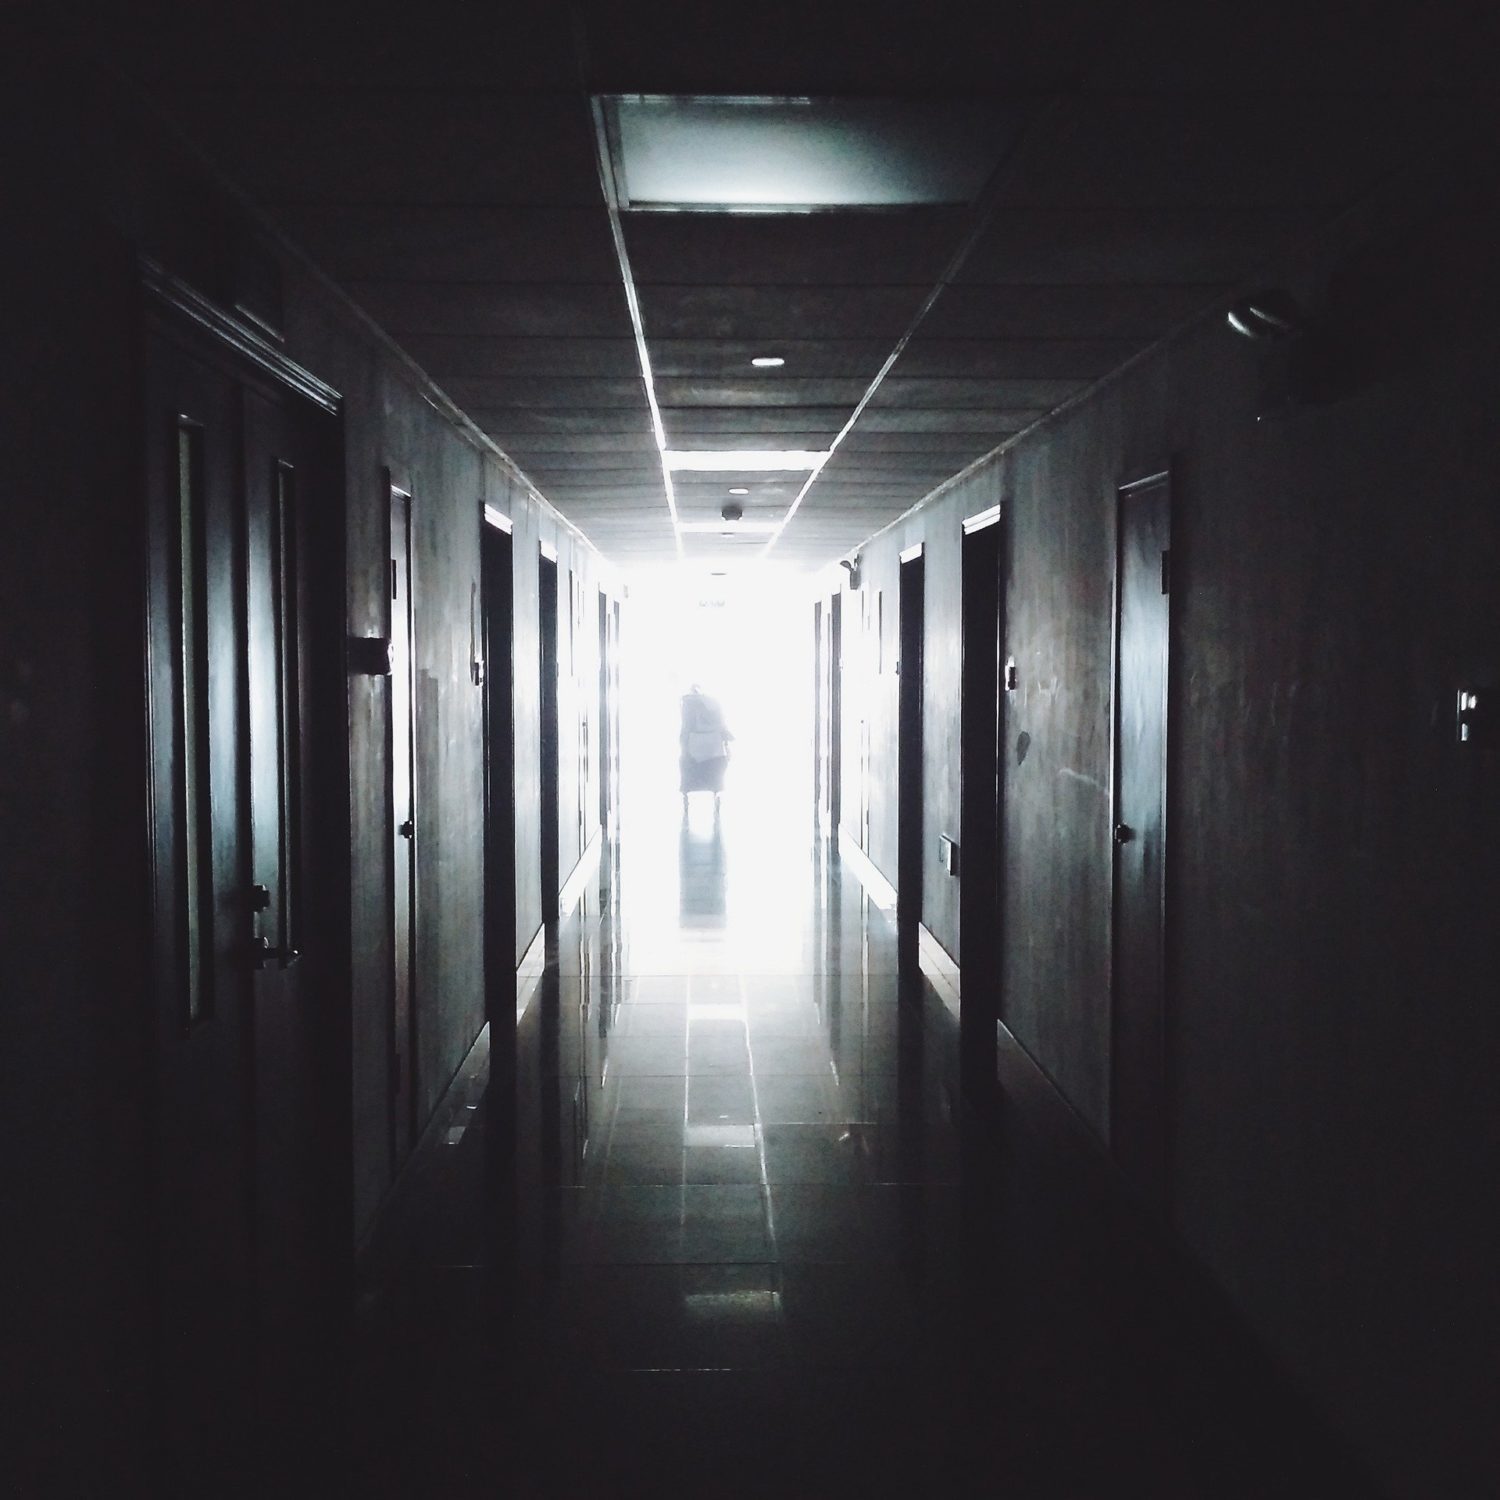 Dark hallway with silhoette or person standing at the end